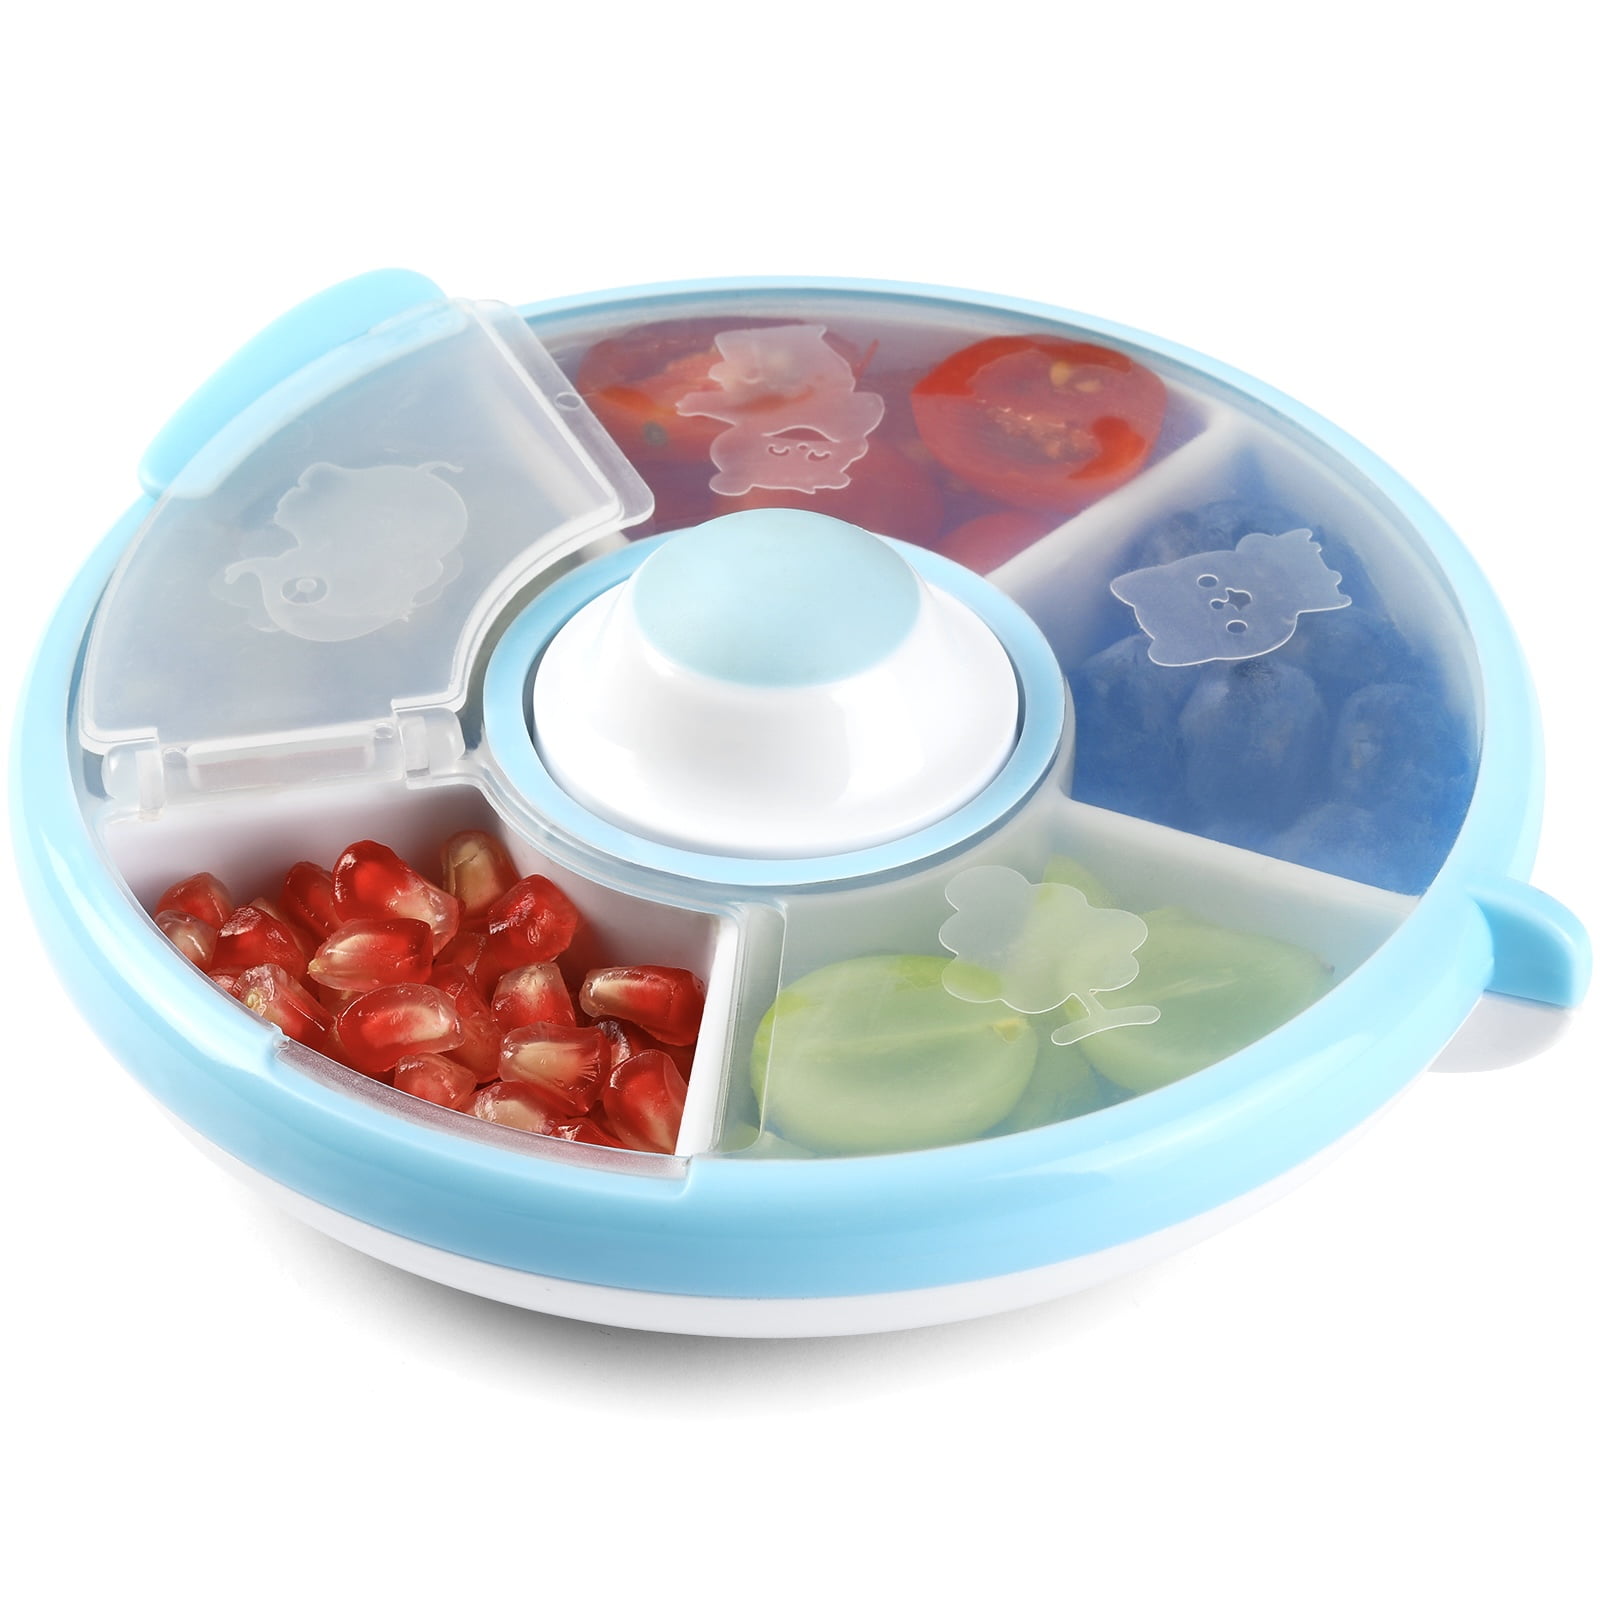 Cowiewie Snack Container for Kids with Lid 